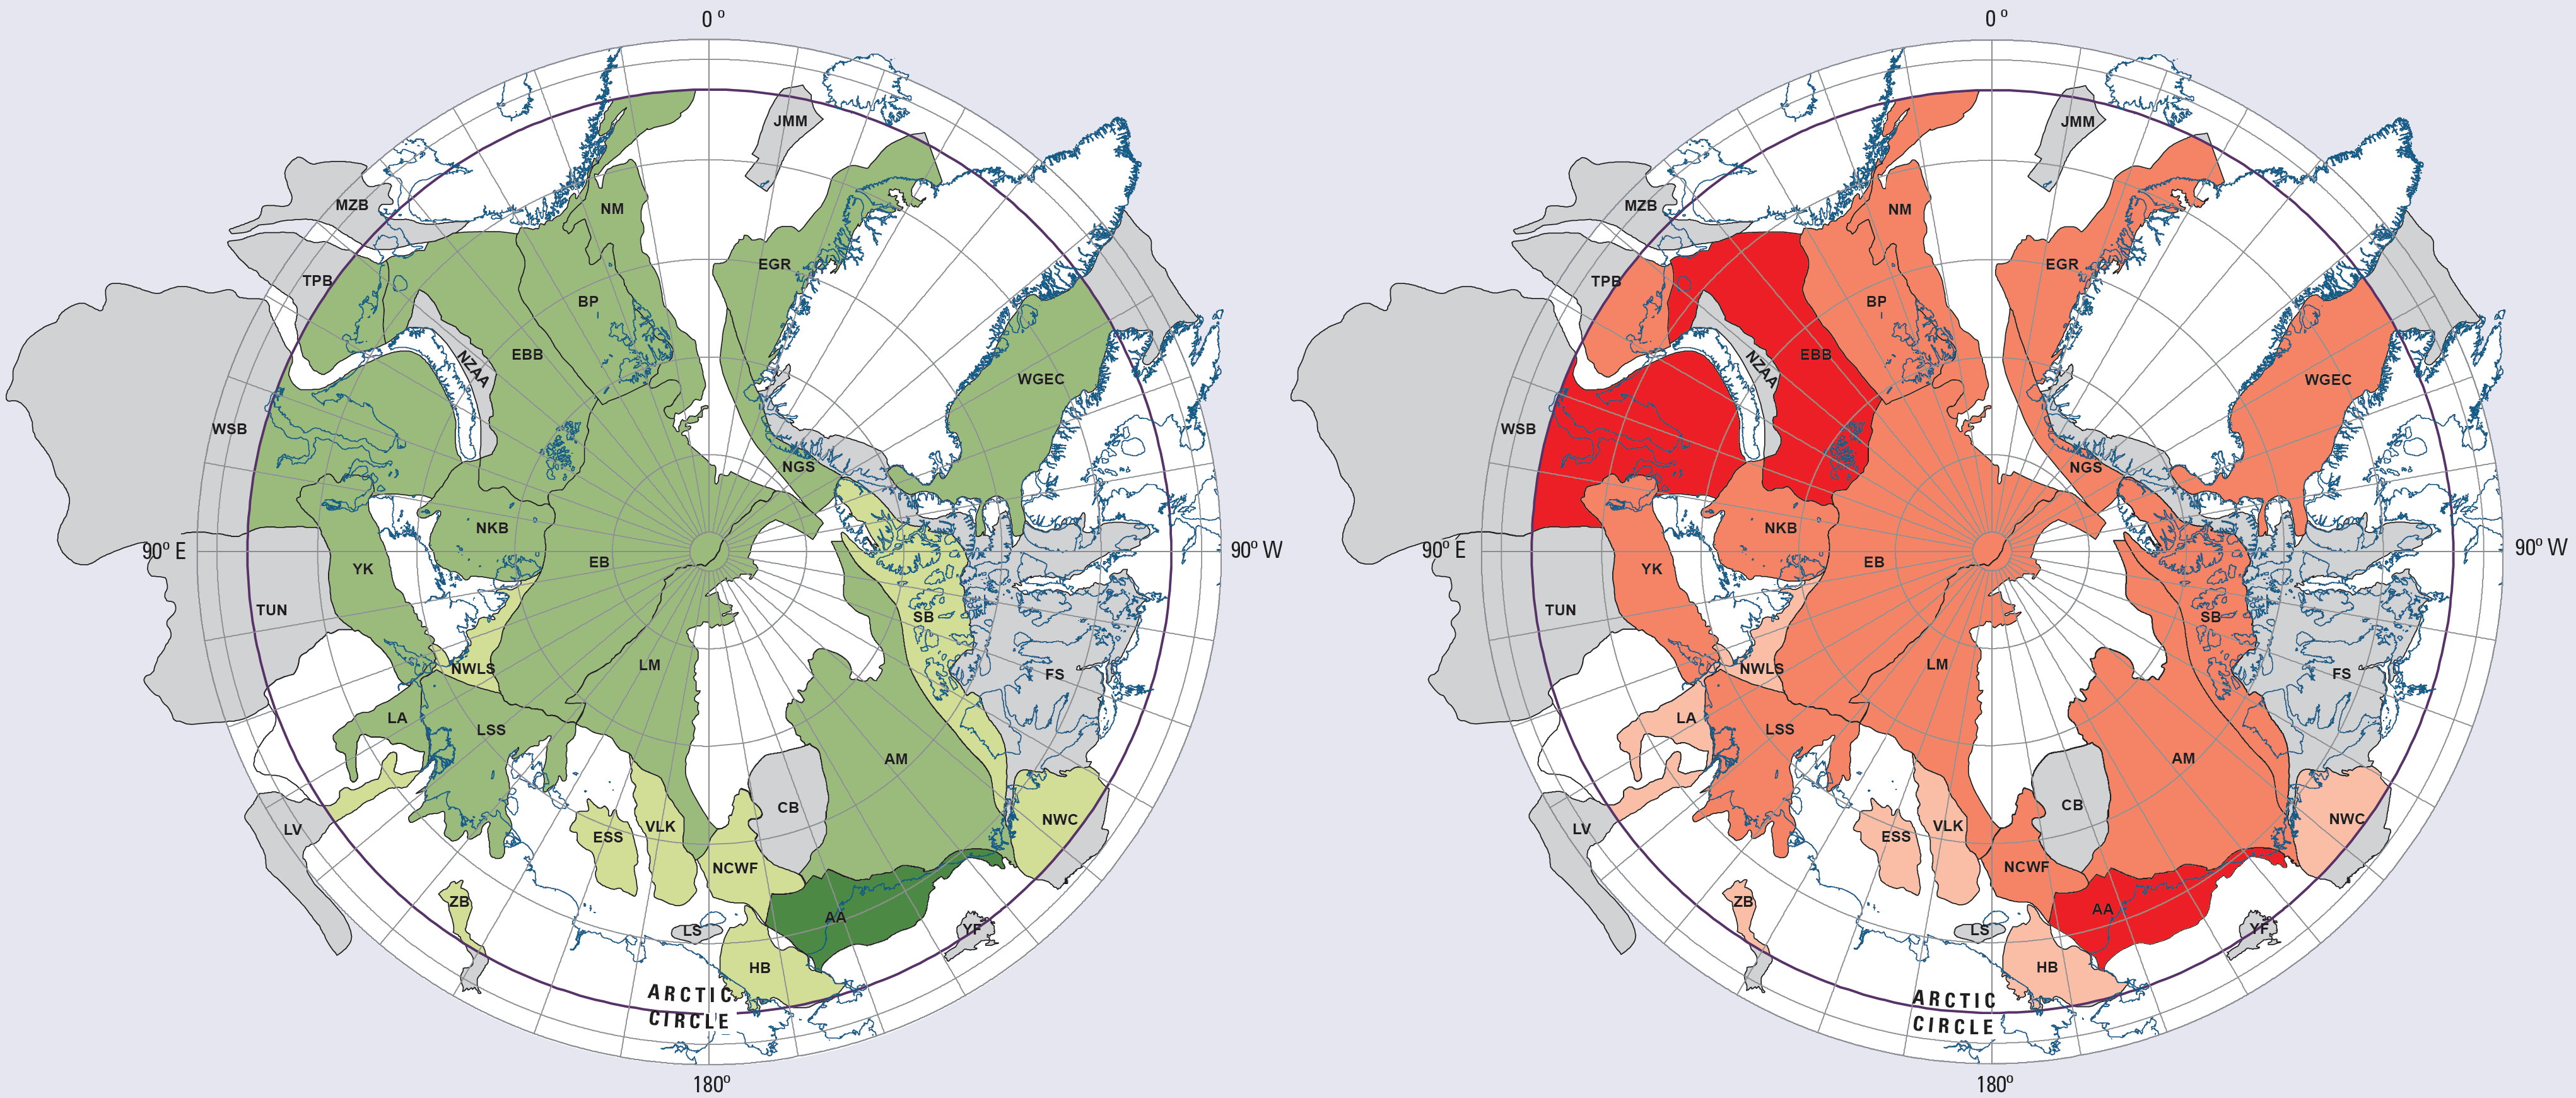 Estimated undiscovered oil (green, left) and gas (red, right) in the Arctic, according to the U.S. Geological Survey (2008).